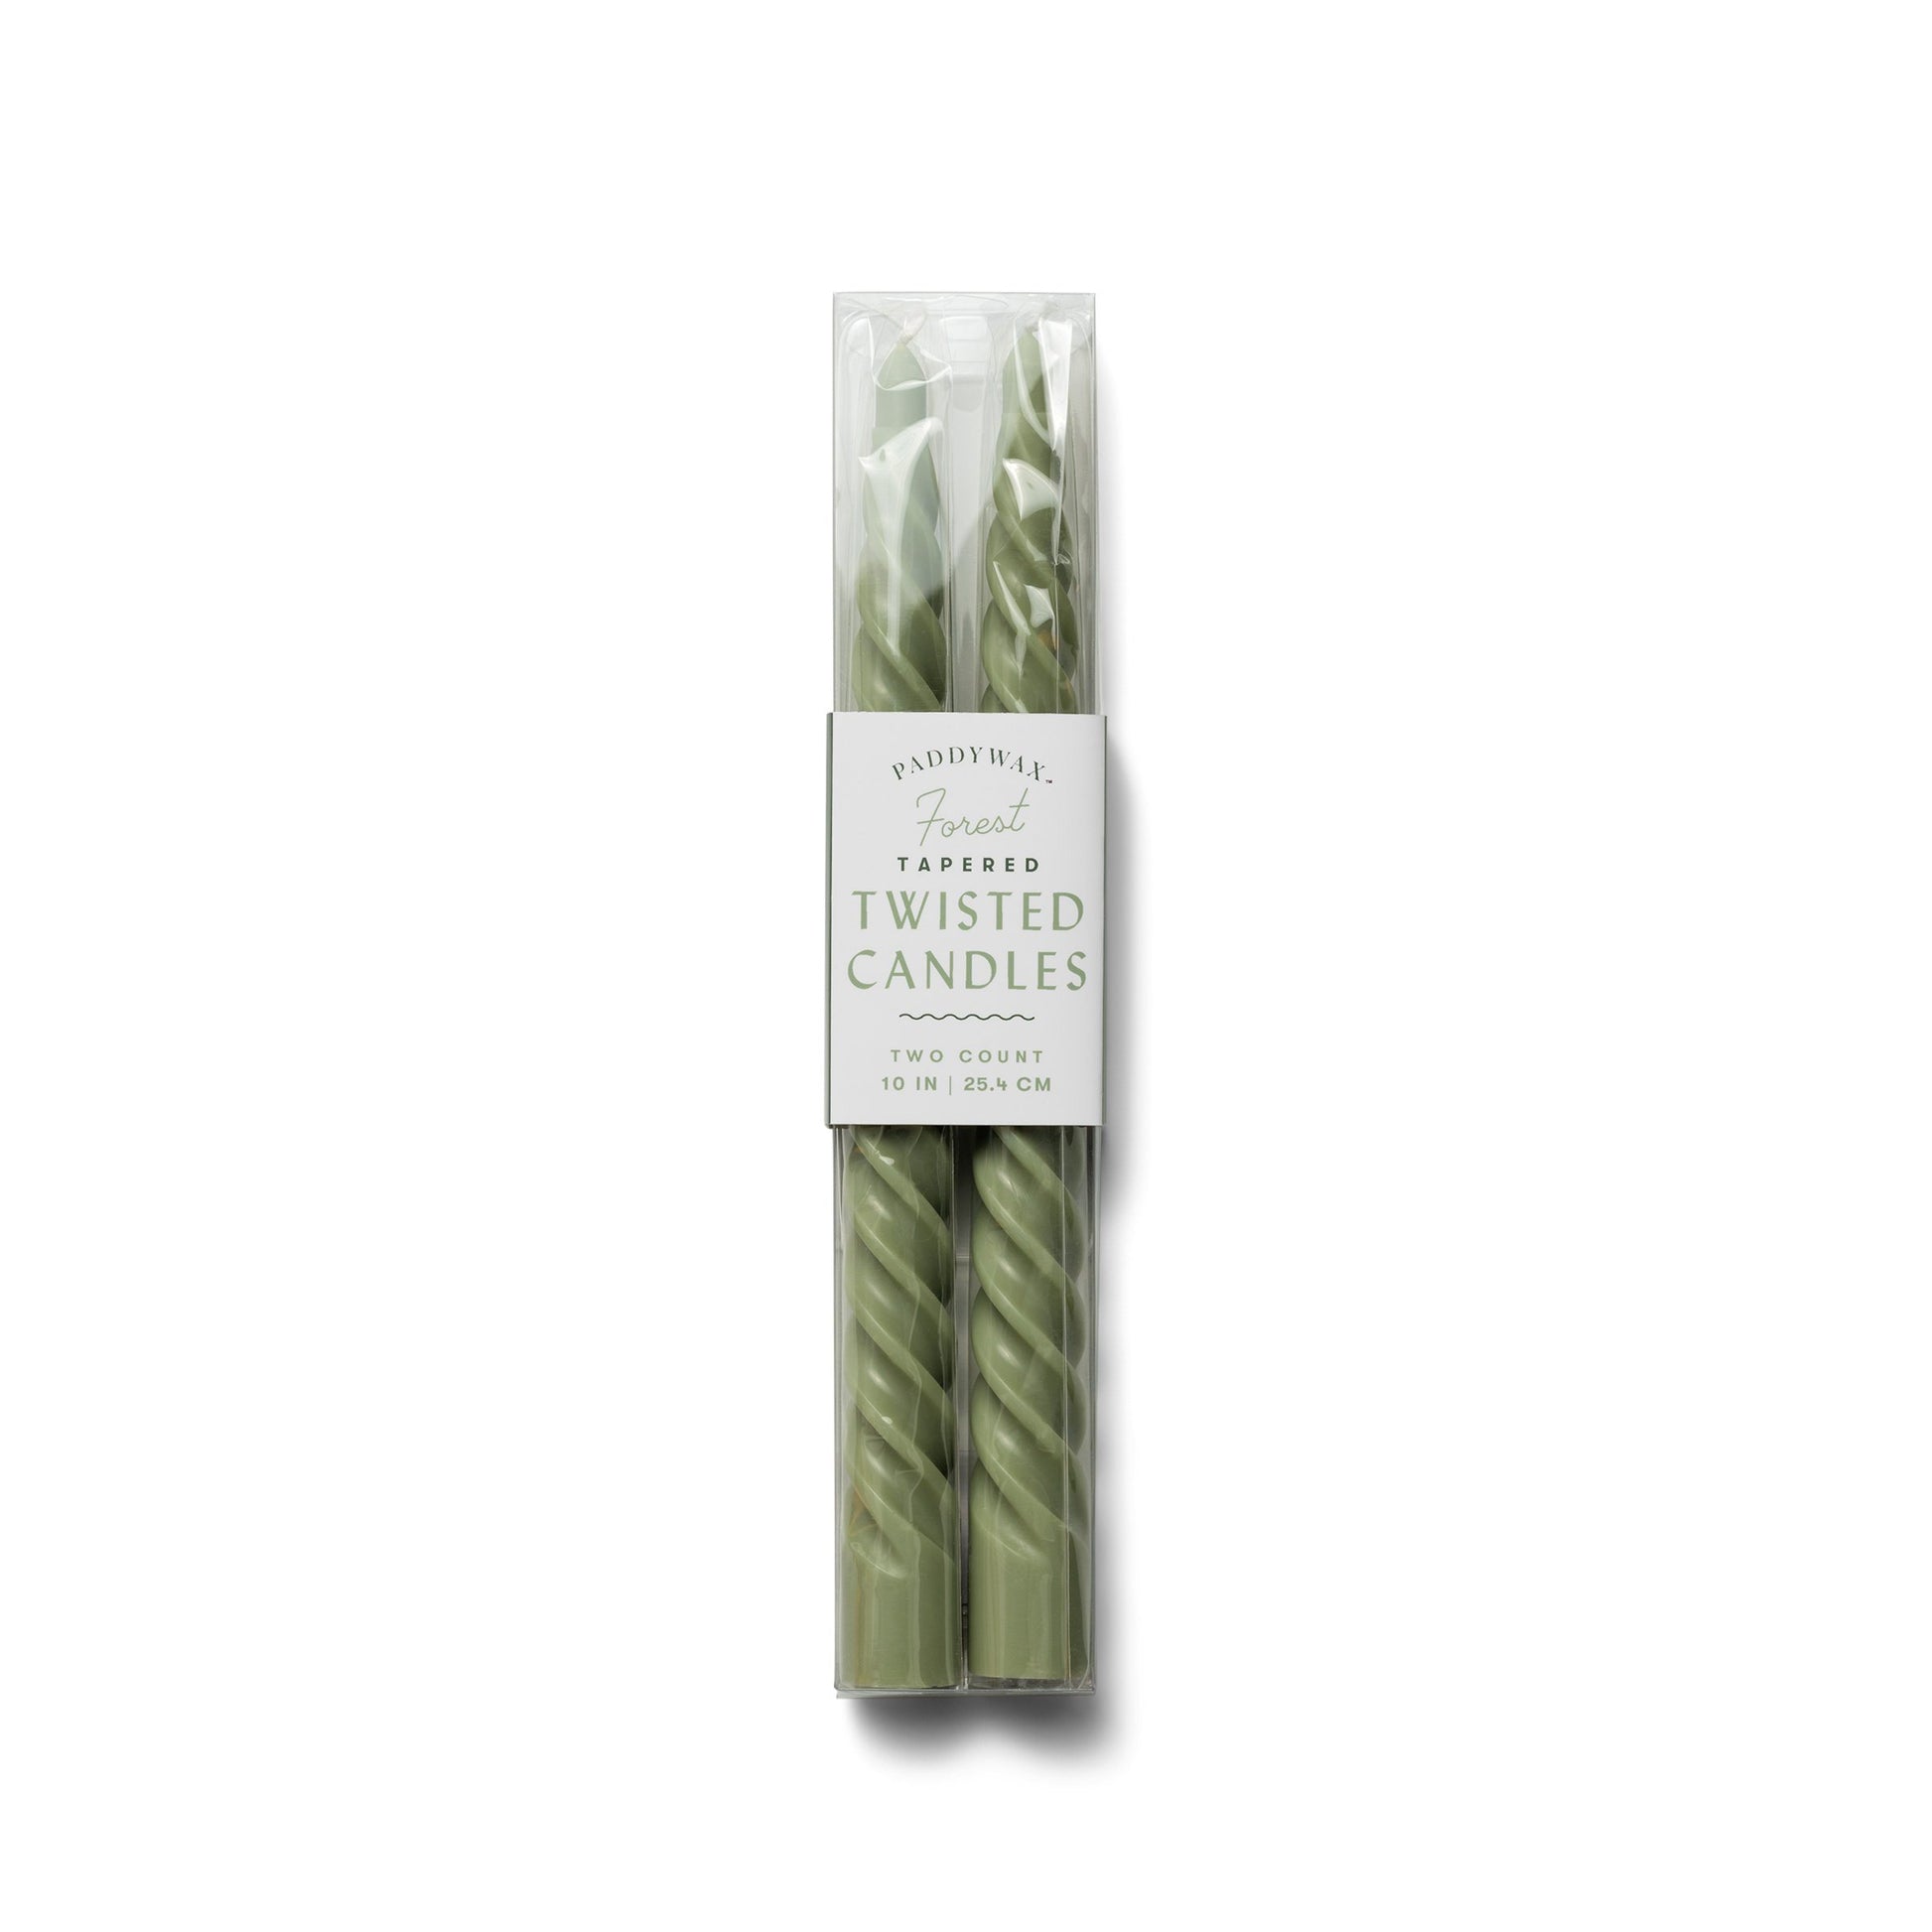 Two 10" non-scented twisted forest green tapers pictured inside the clear package with white label